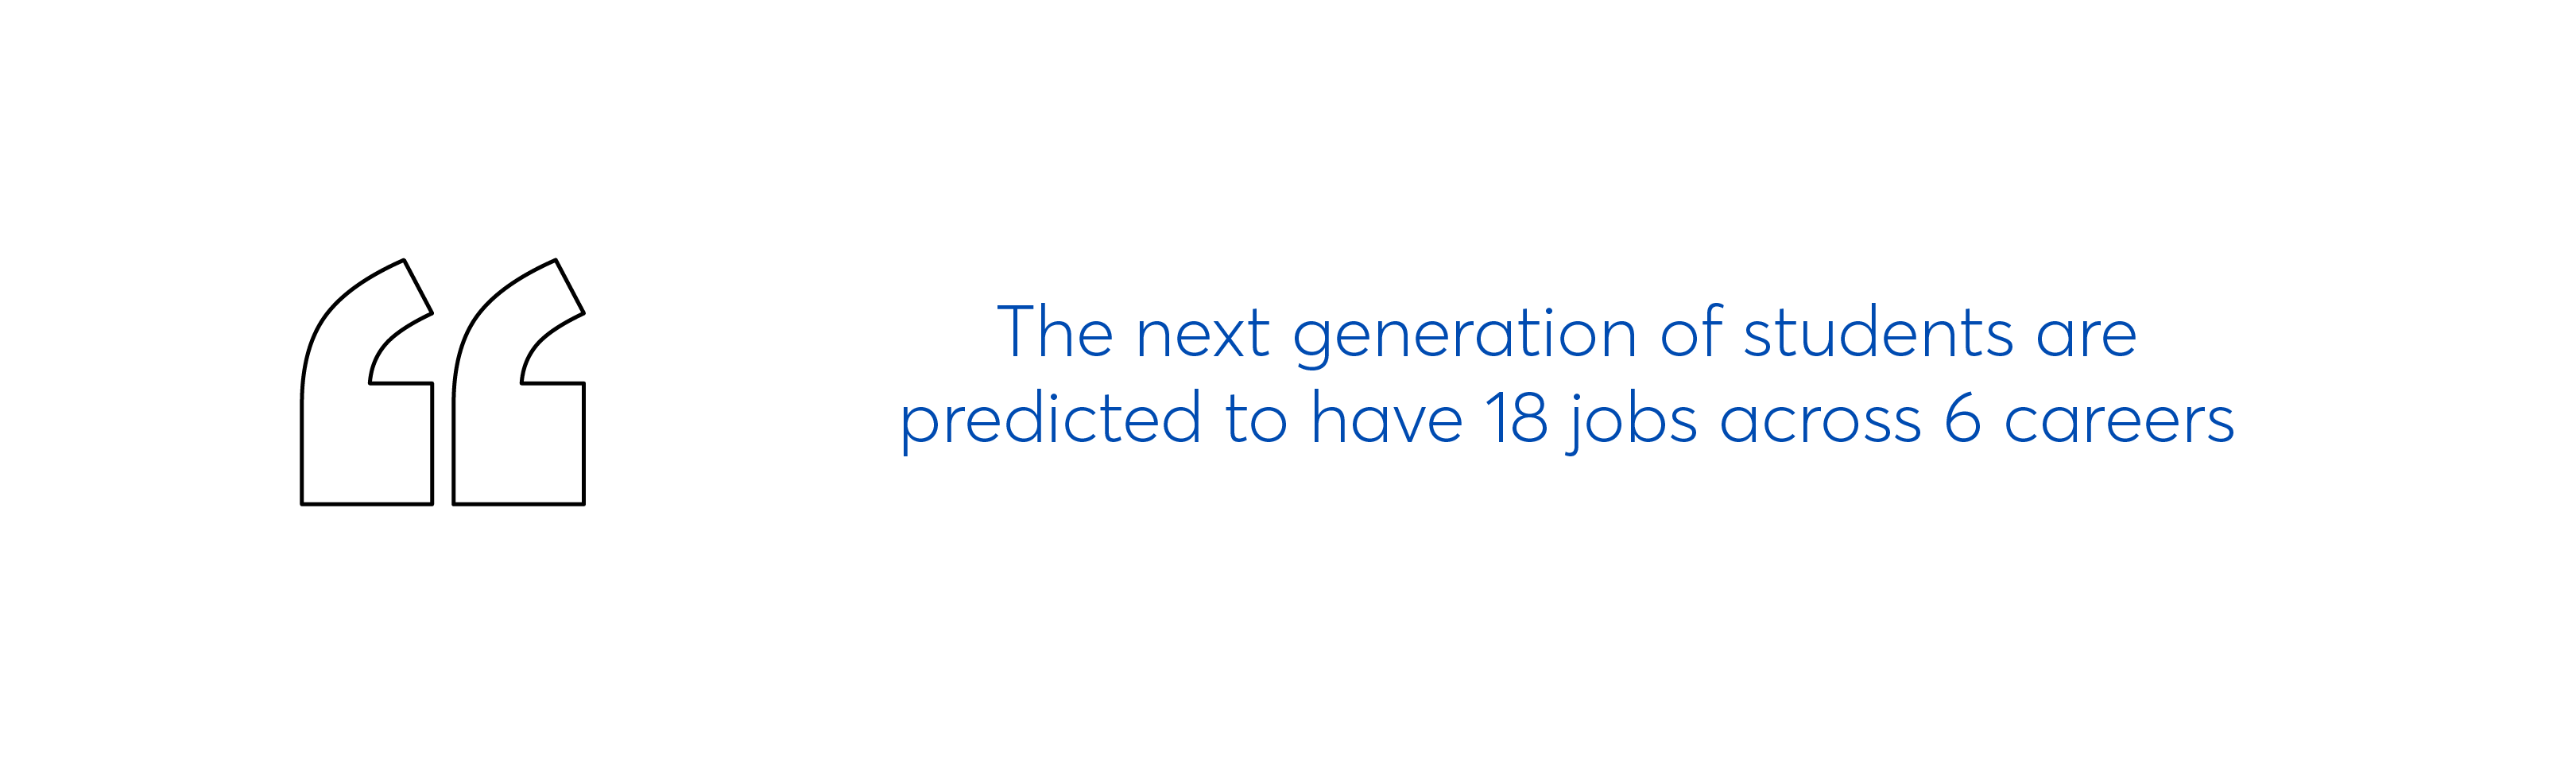 Next generation predicted to have 18 jobs over 6 careers